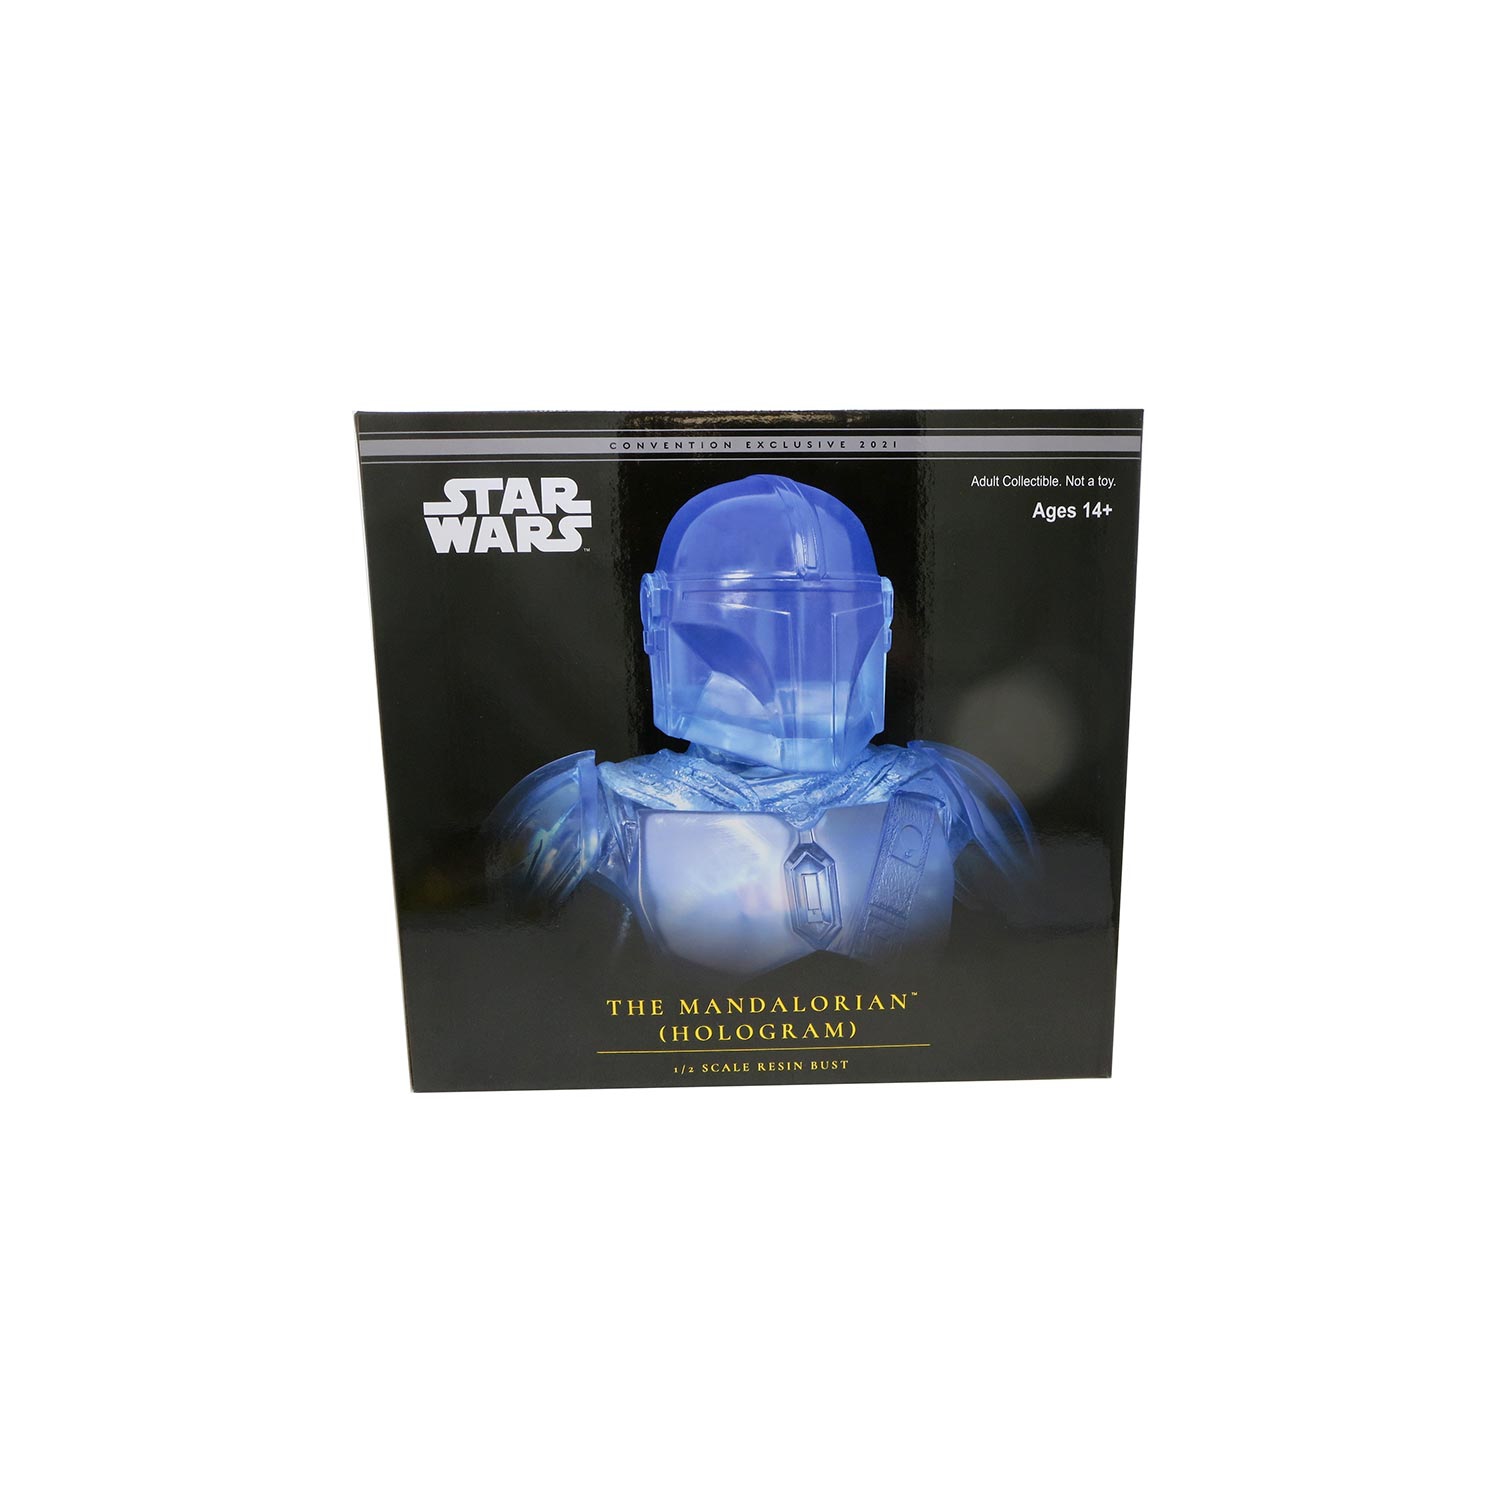 Star Wars Collectible L3D Light 10 Inch Bust Statue SDCC - The Mandalo